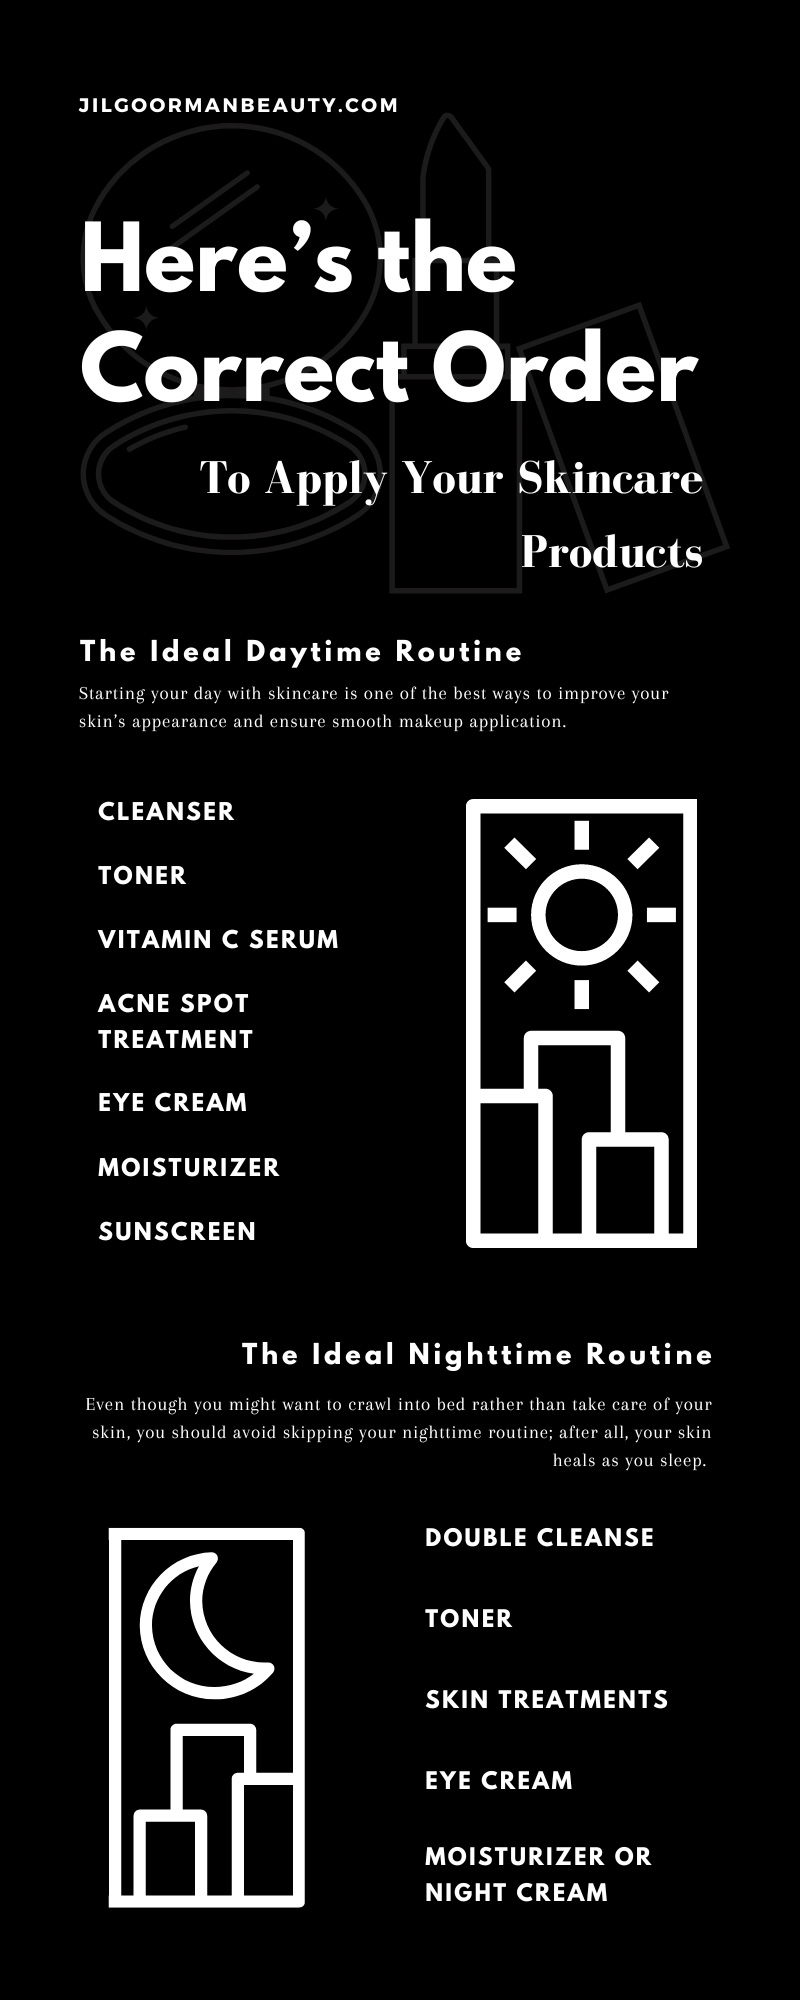 Here’s the Correct Order To Apply Your Skincare Products